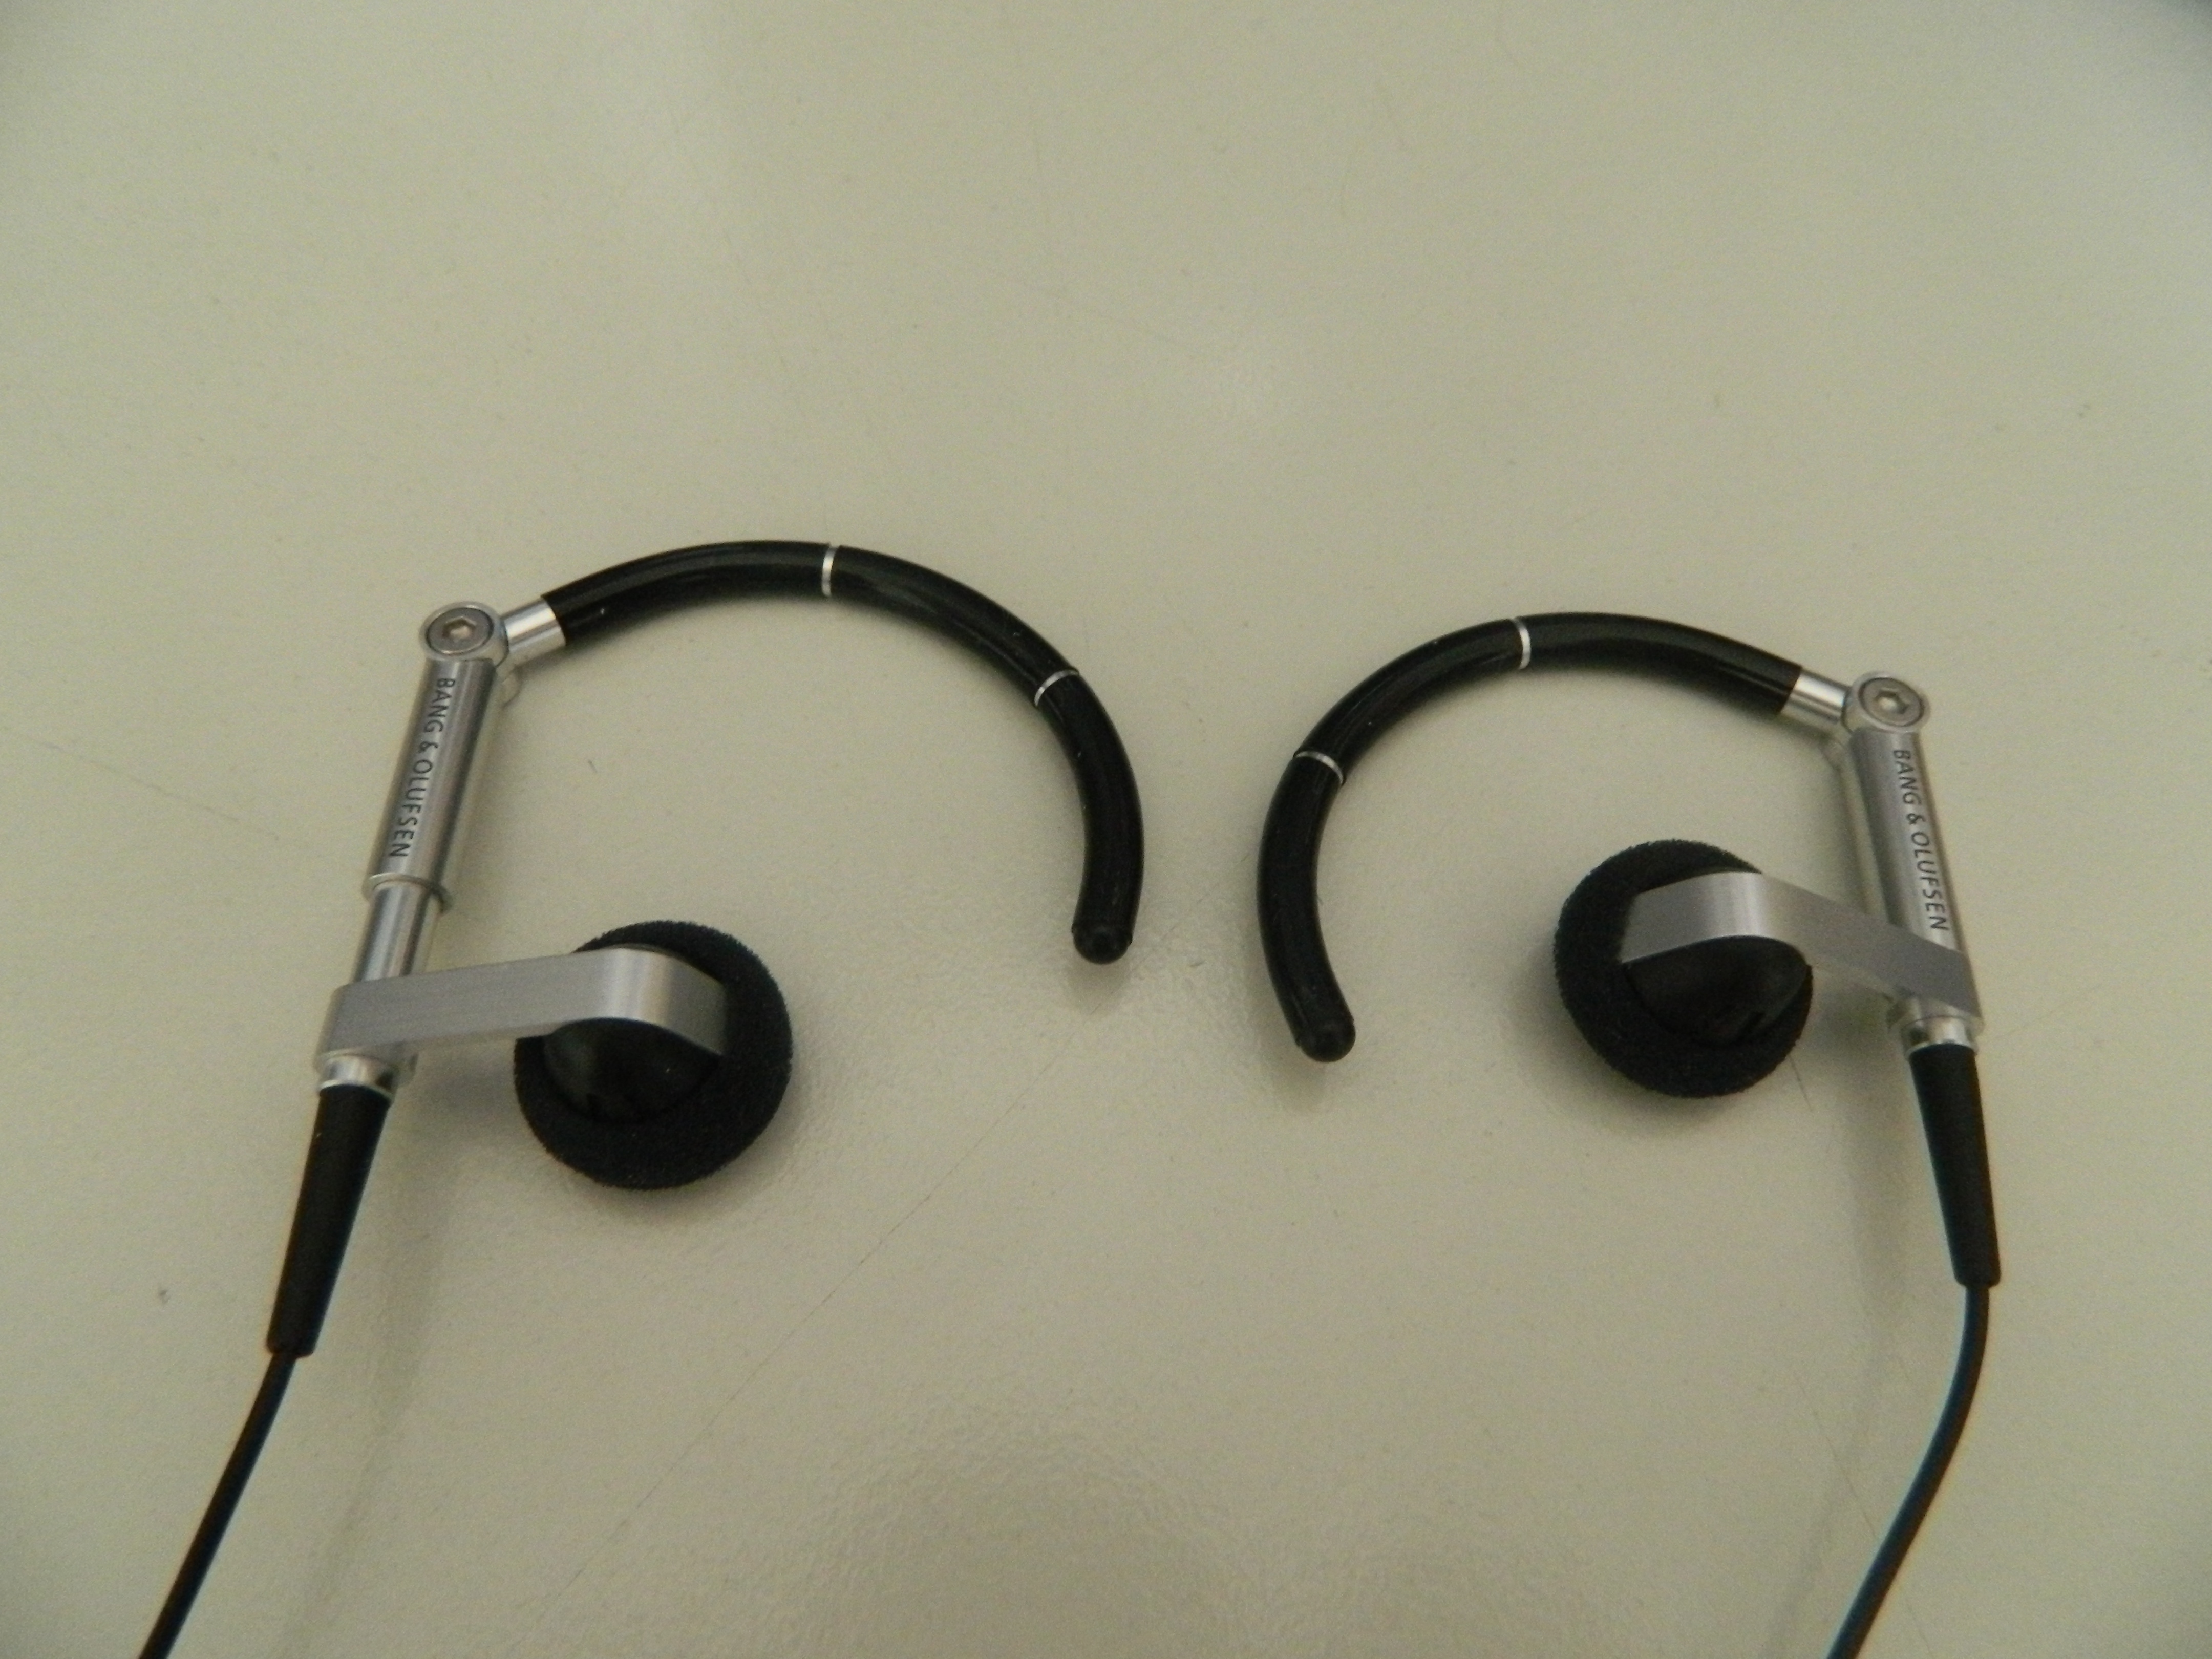 EarSet 3i by Bang & Olufsen: la recensione [video]